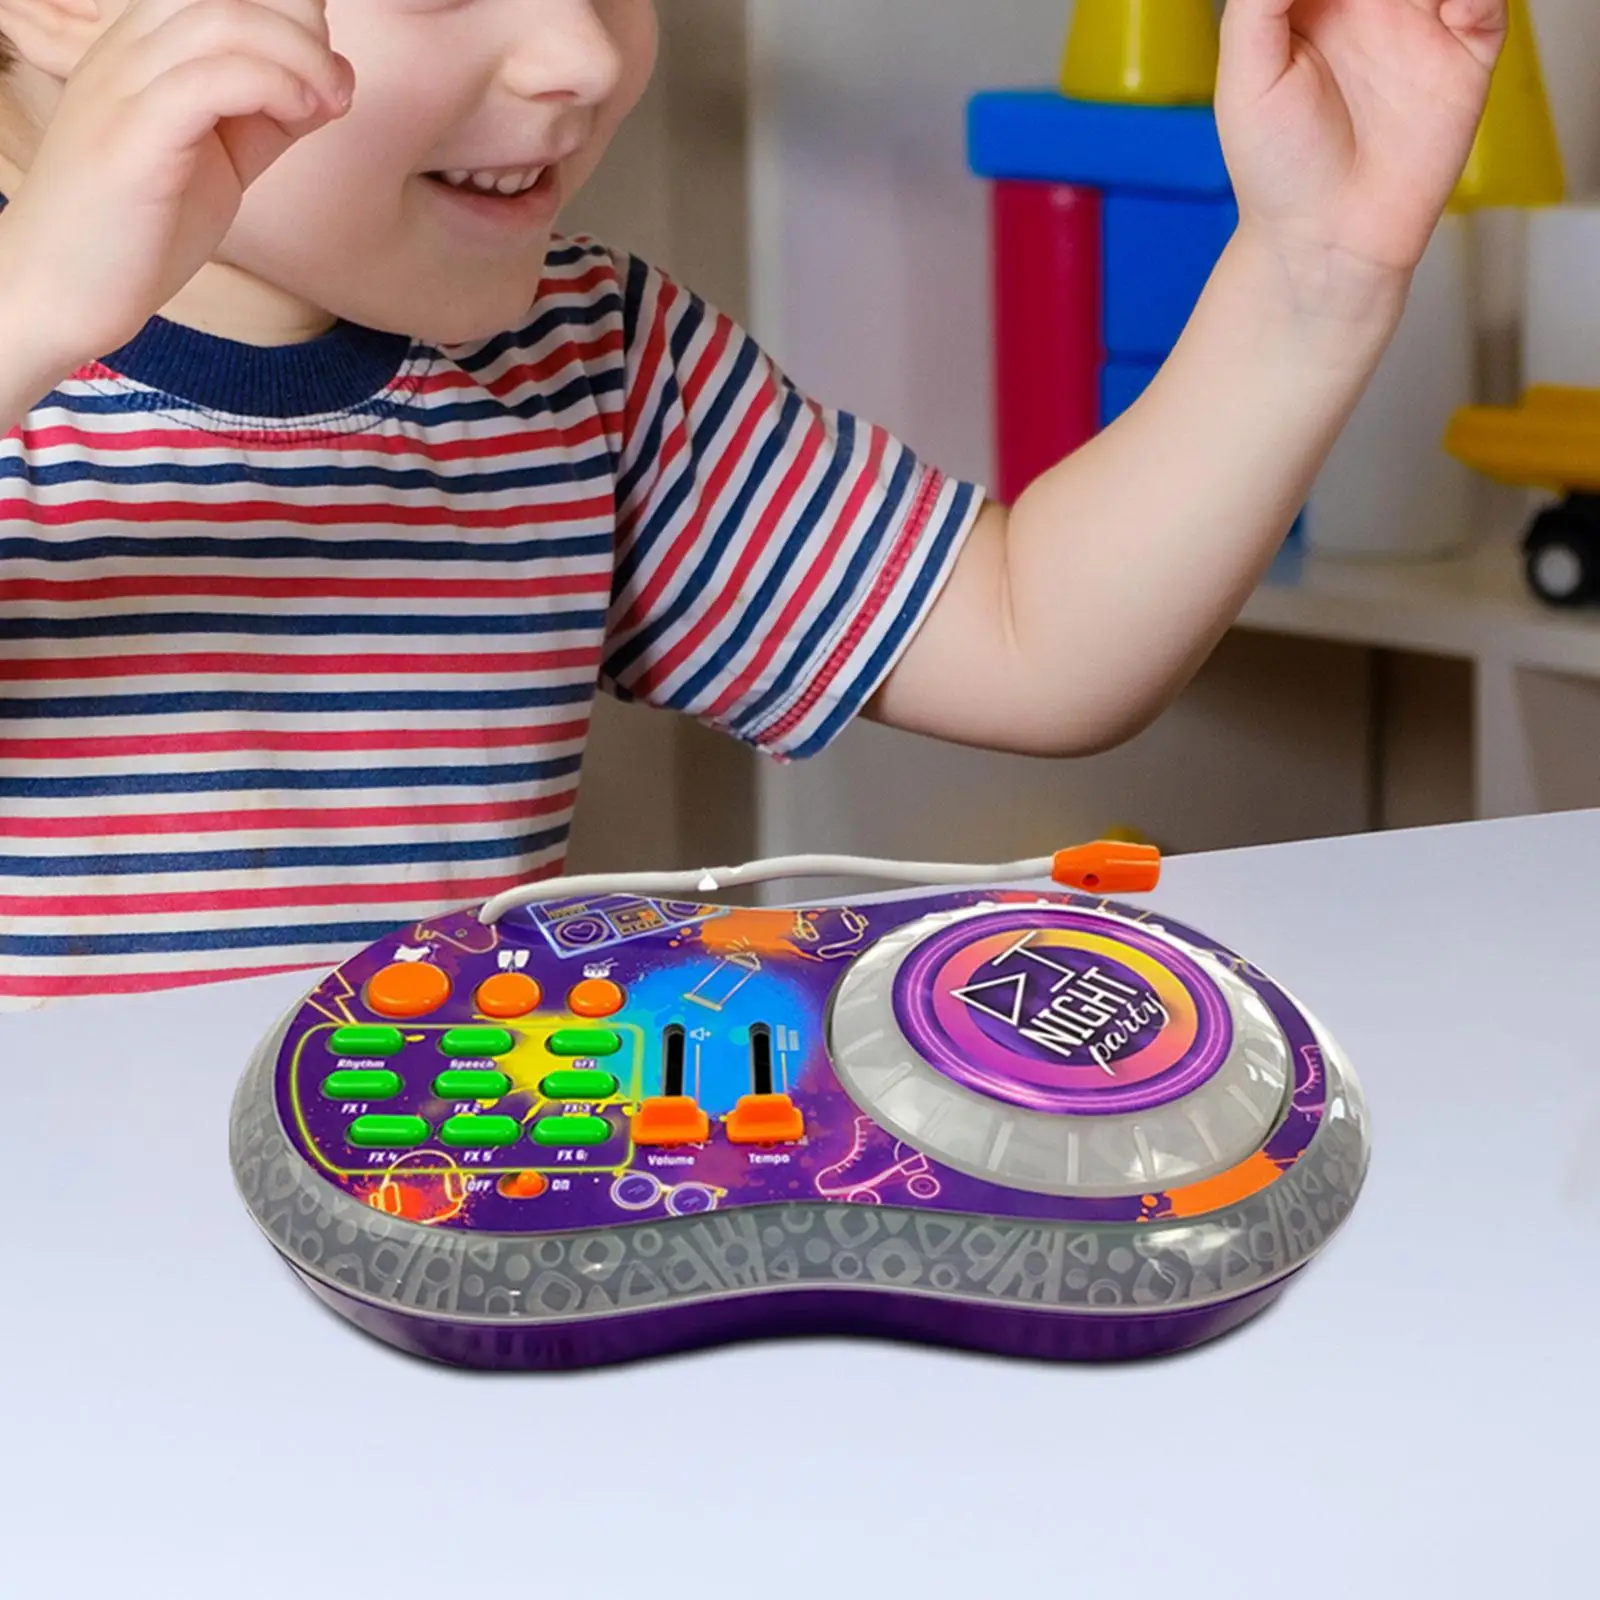 Musical Toys Turntable Musical Sound Effects Record Light Show DJ Party Mixer Toy for Children`s Day Toddler Children Kids Girls